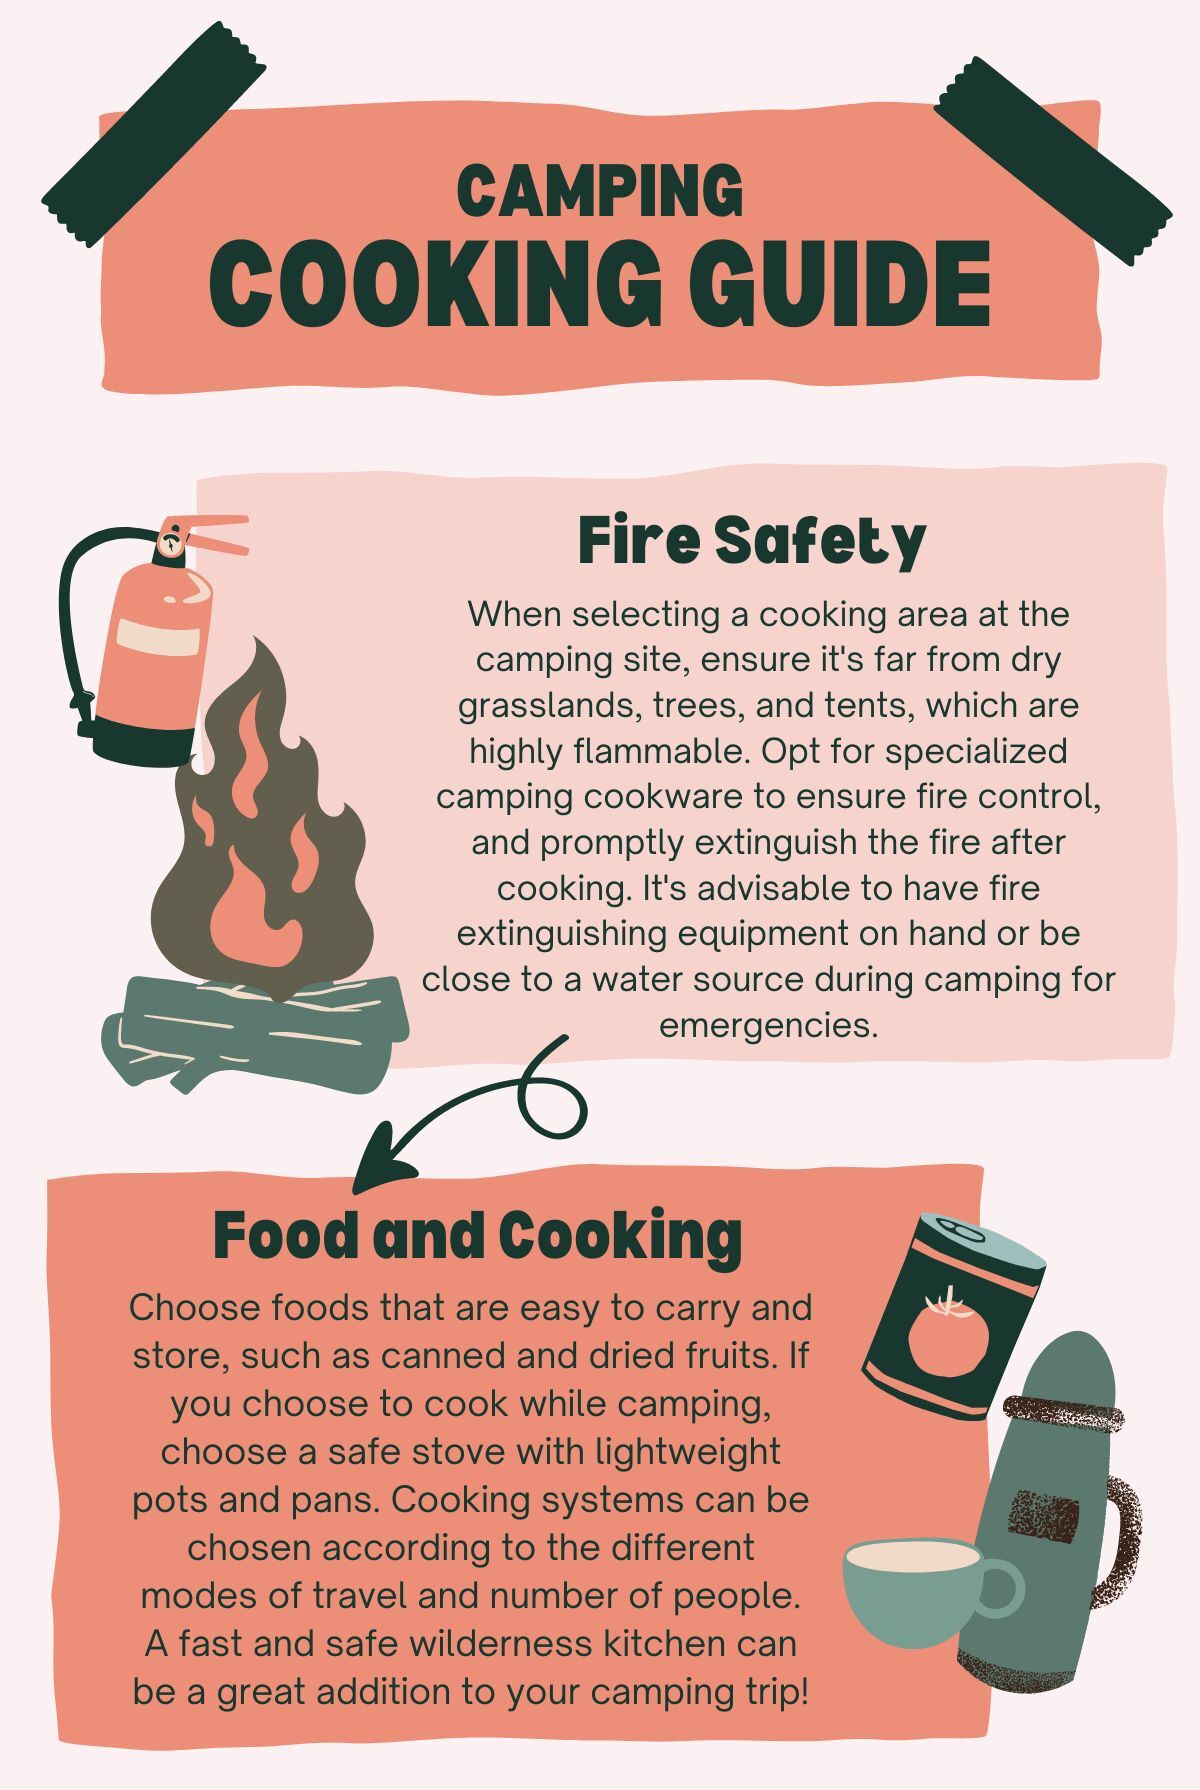 5/14 - Camping Cooking Guide is here!